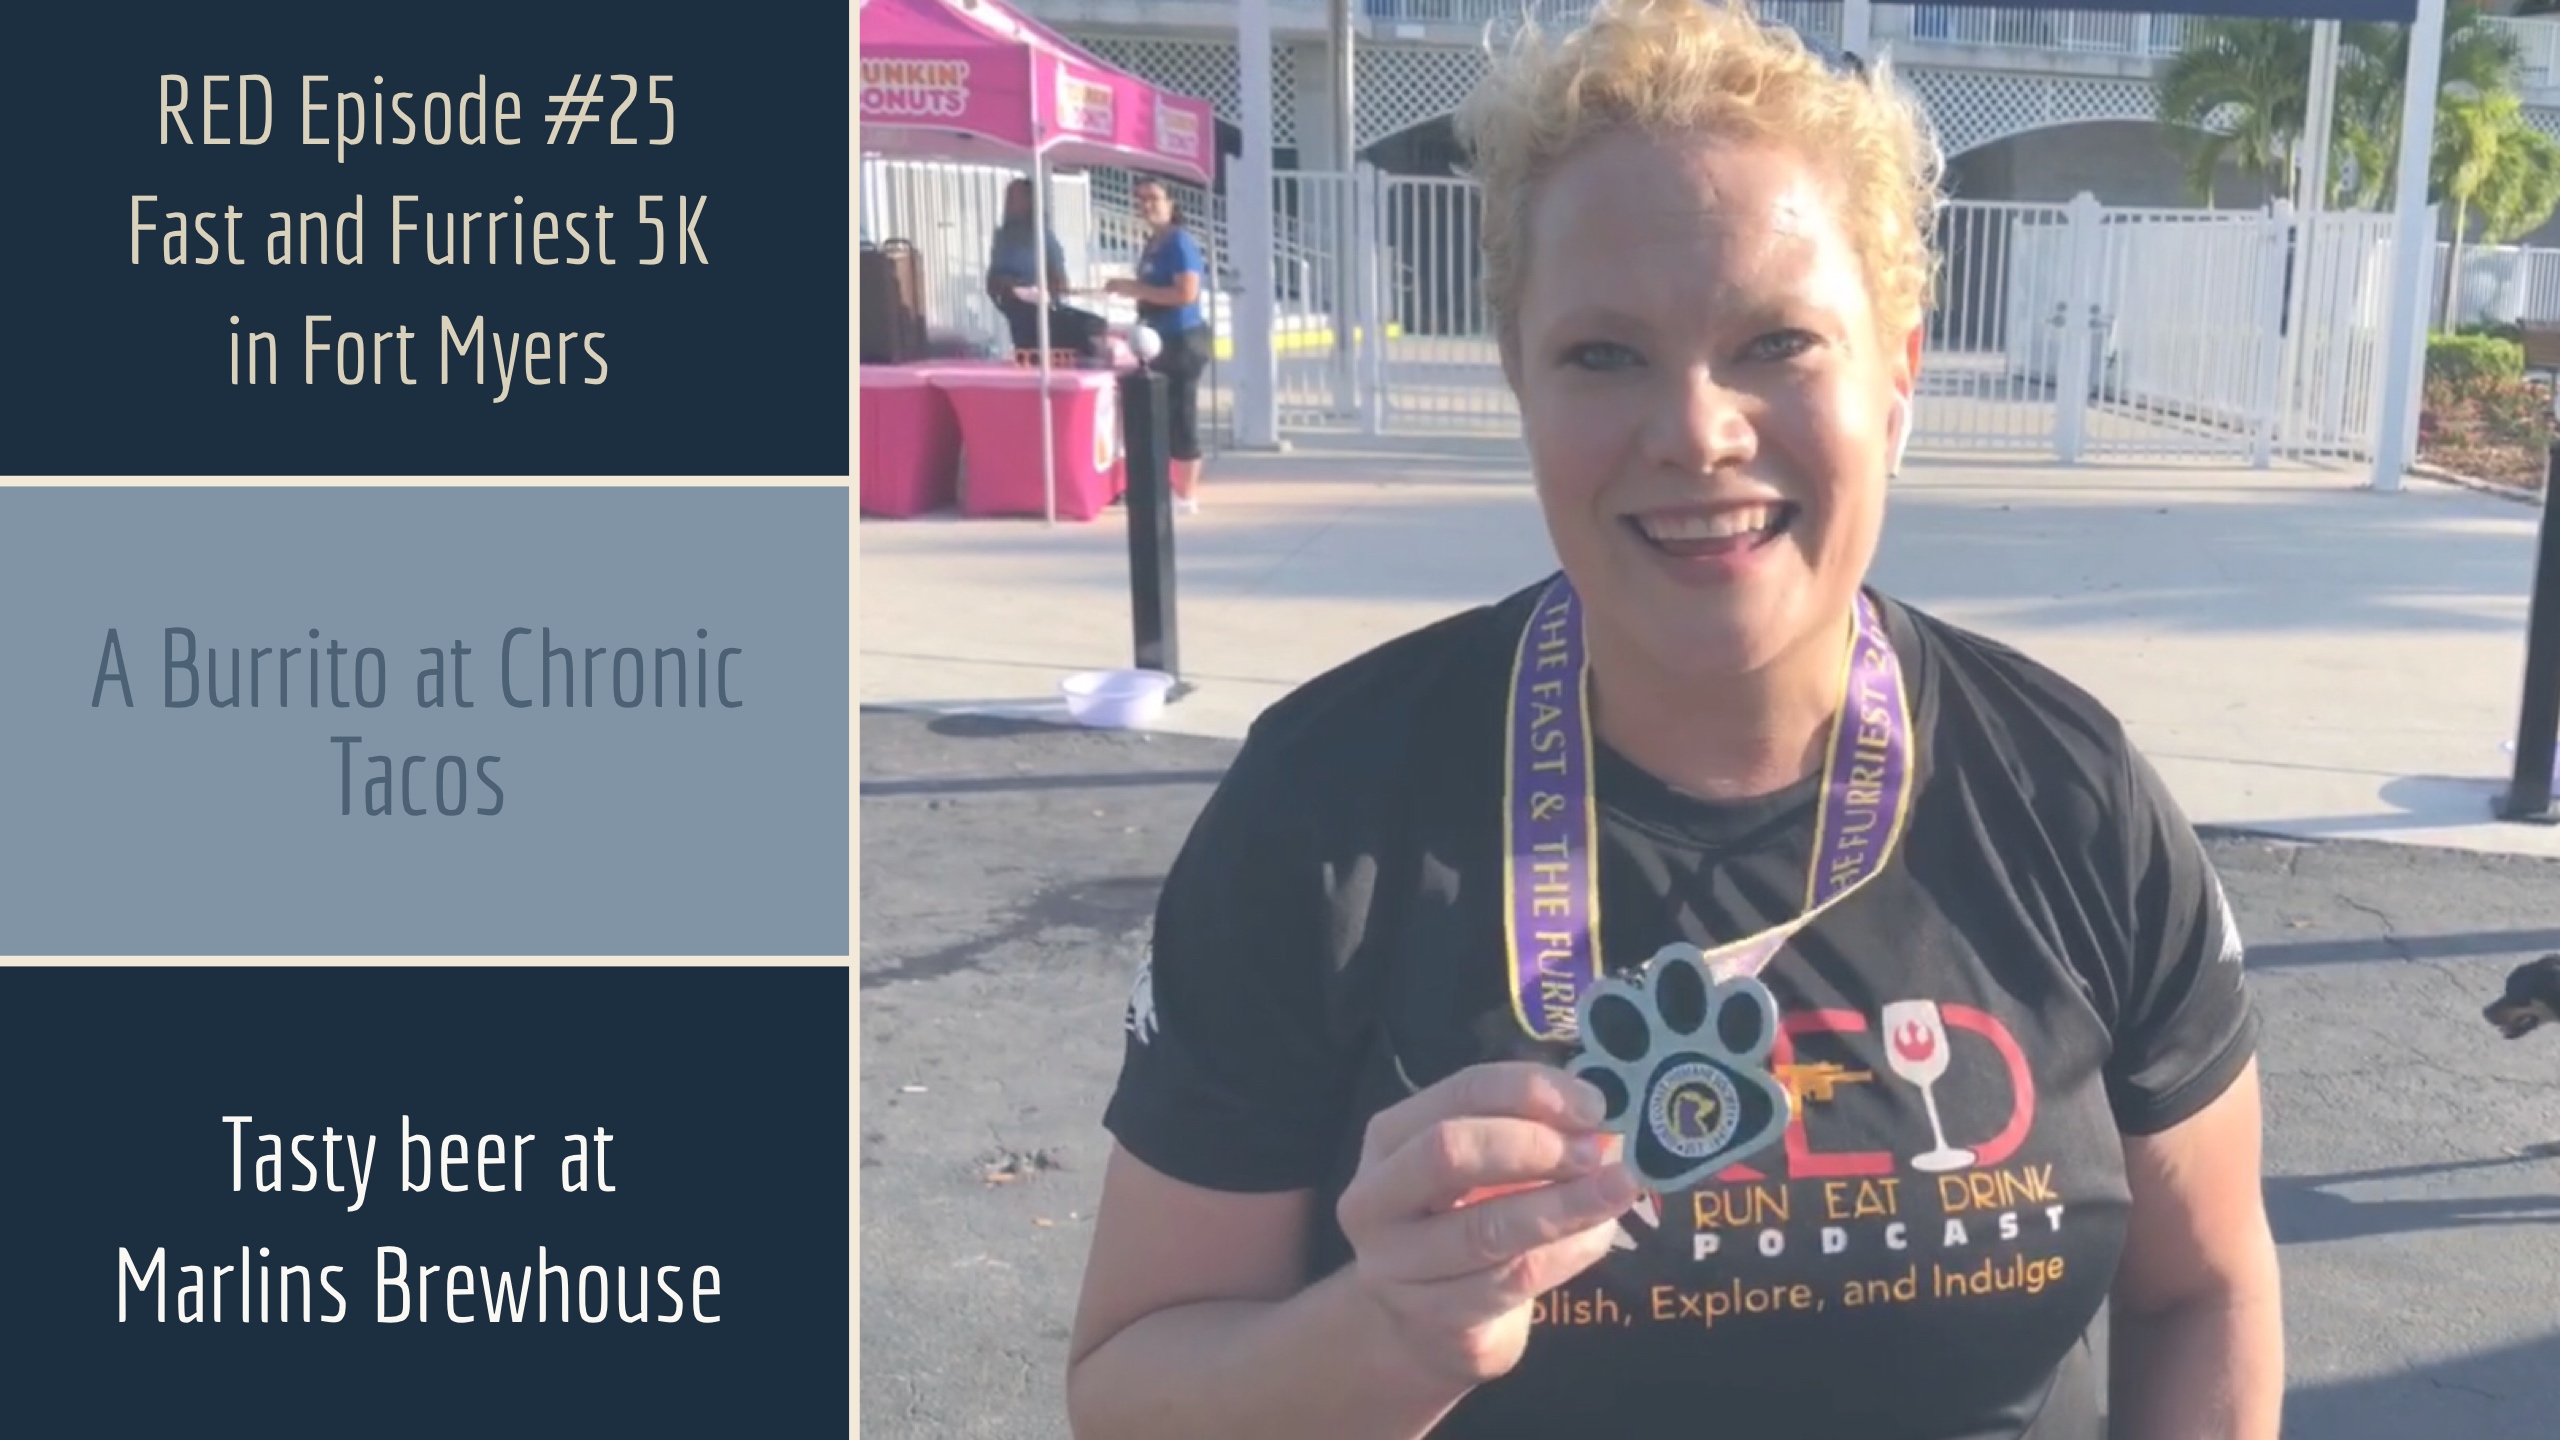 RED Episode #25: The Fast and The Furriest 5K in Fort Myers